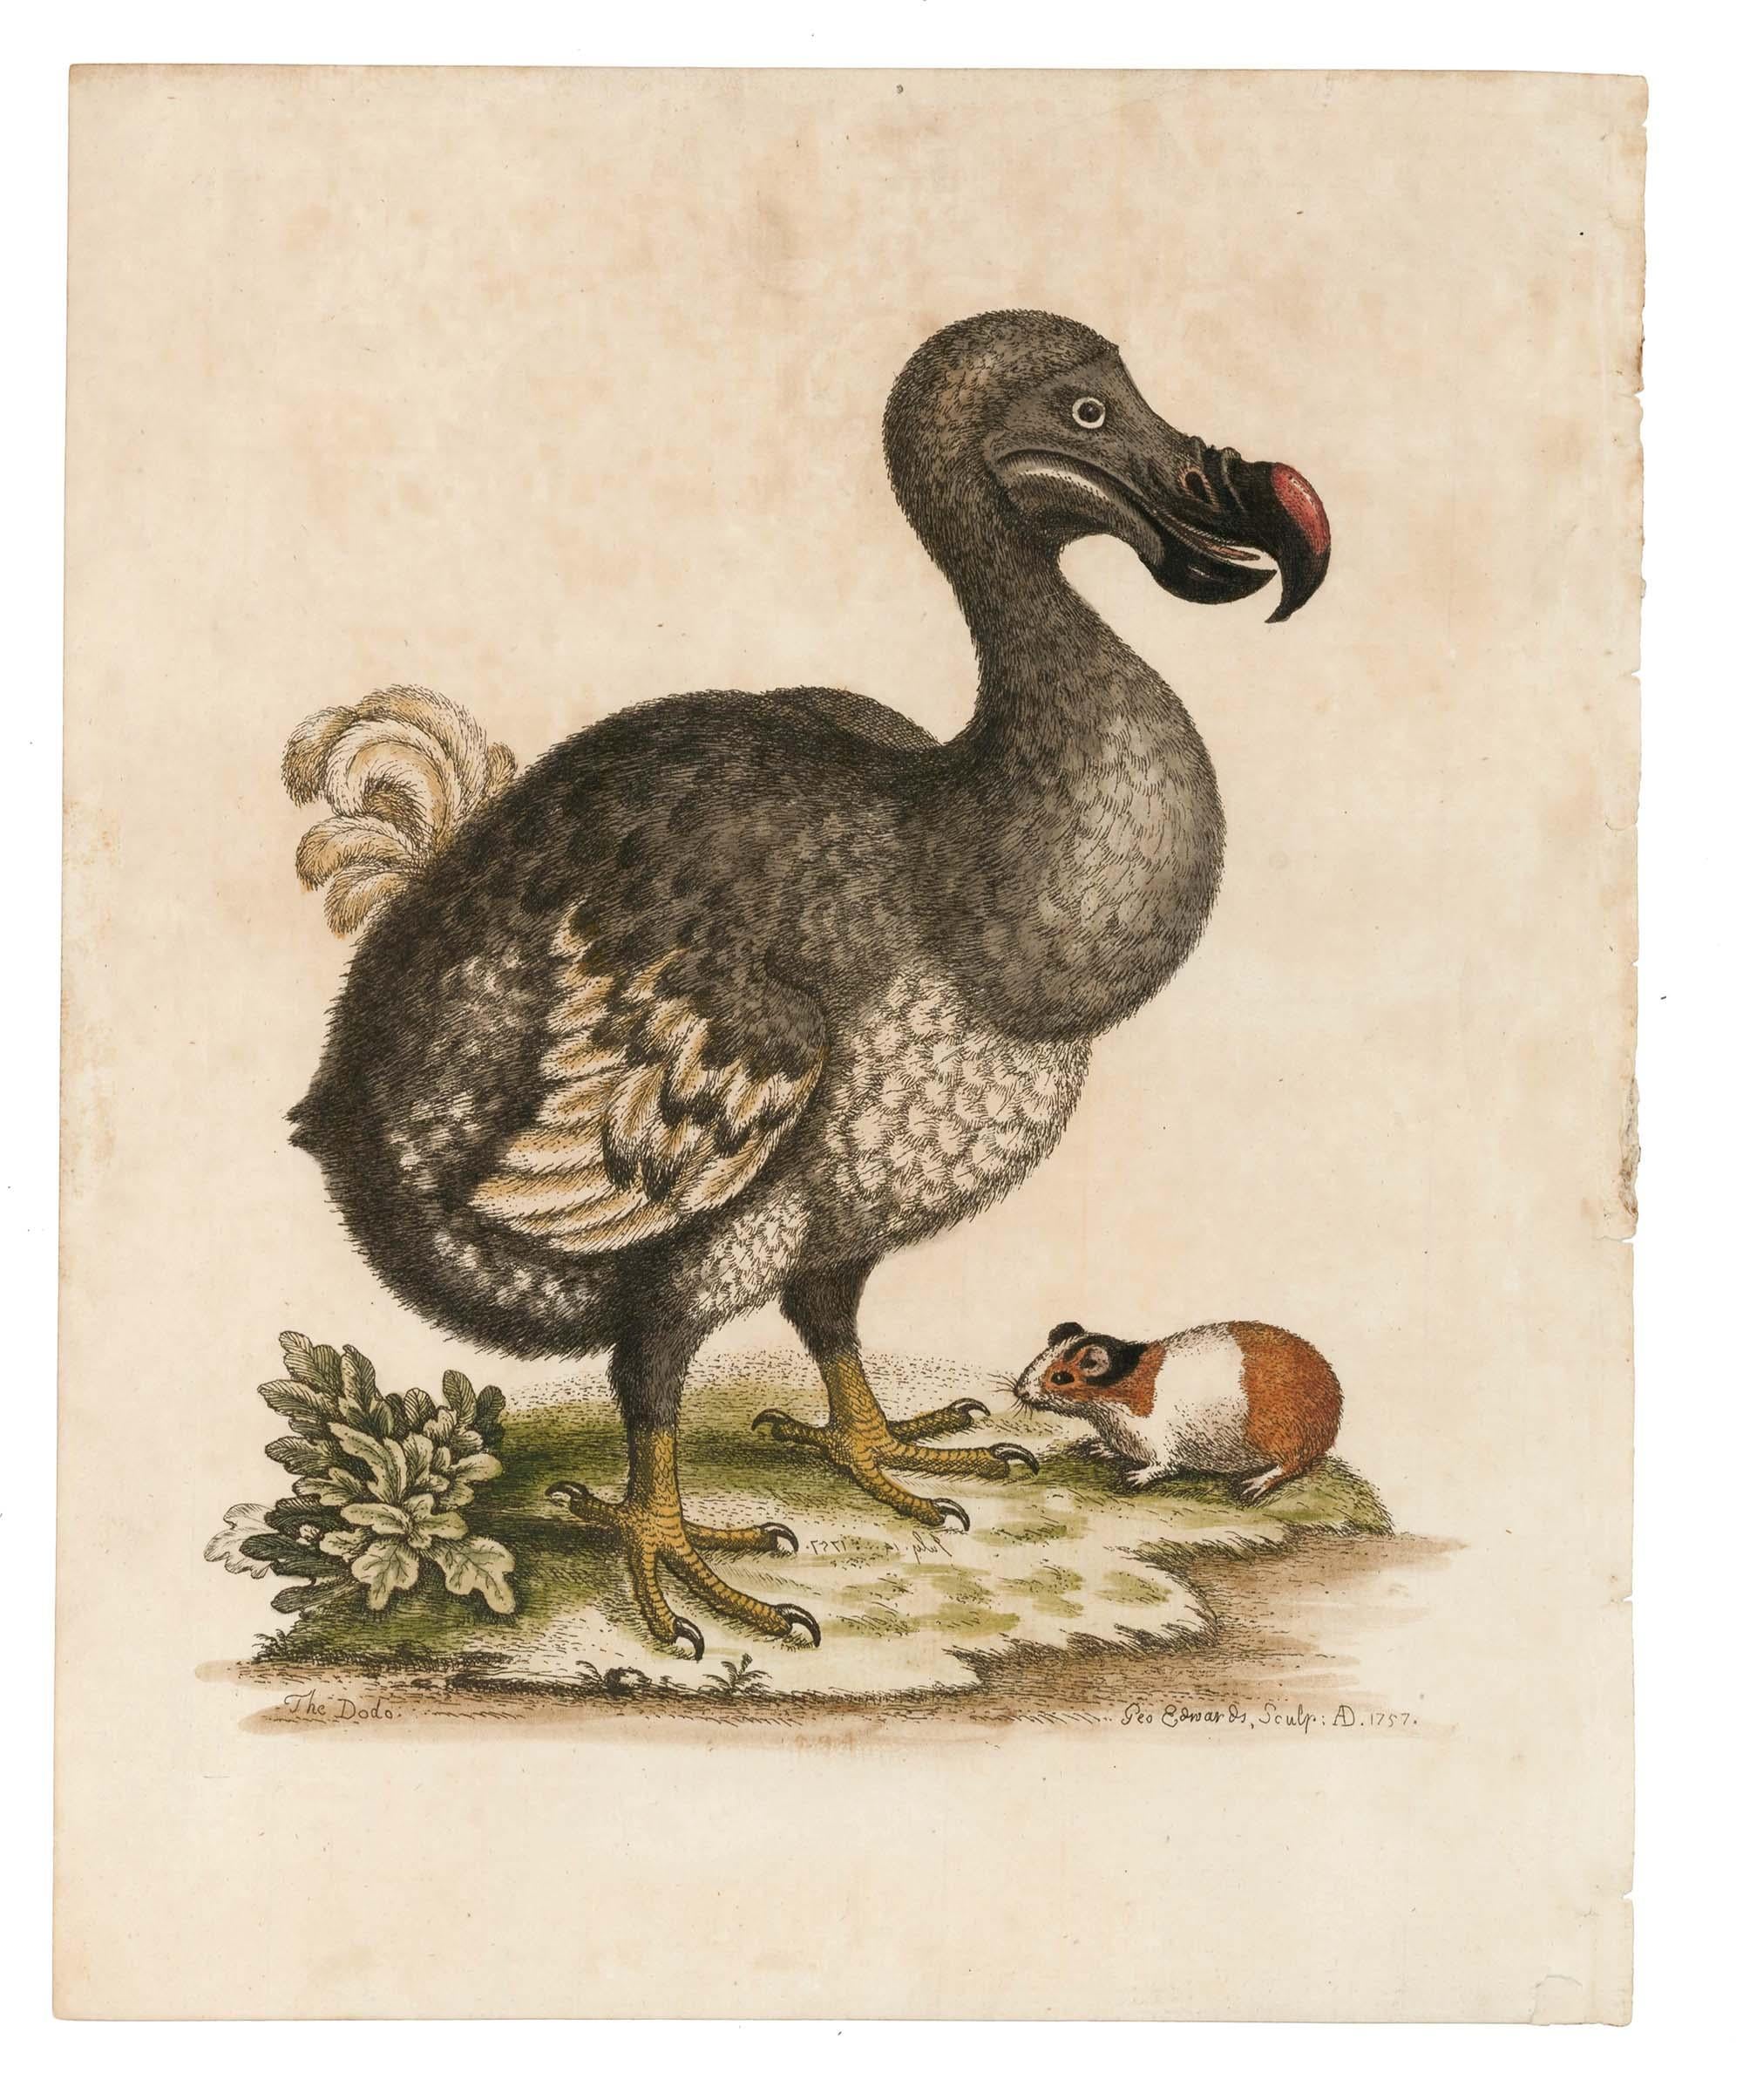  Hand-Colored Dodo Bird Engraving - Print by George Edwards